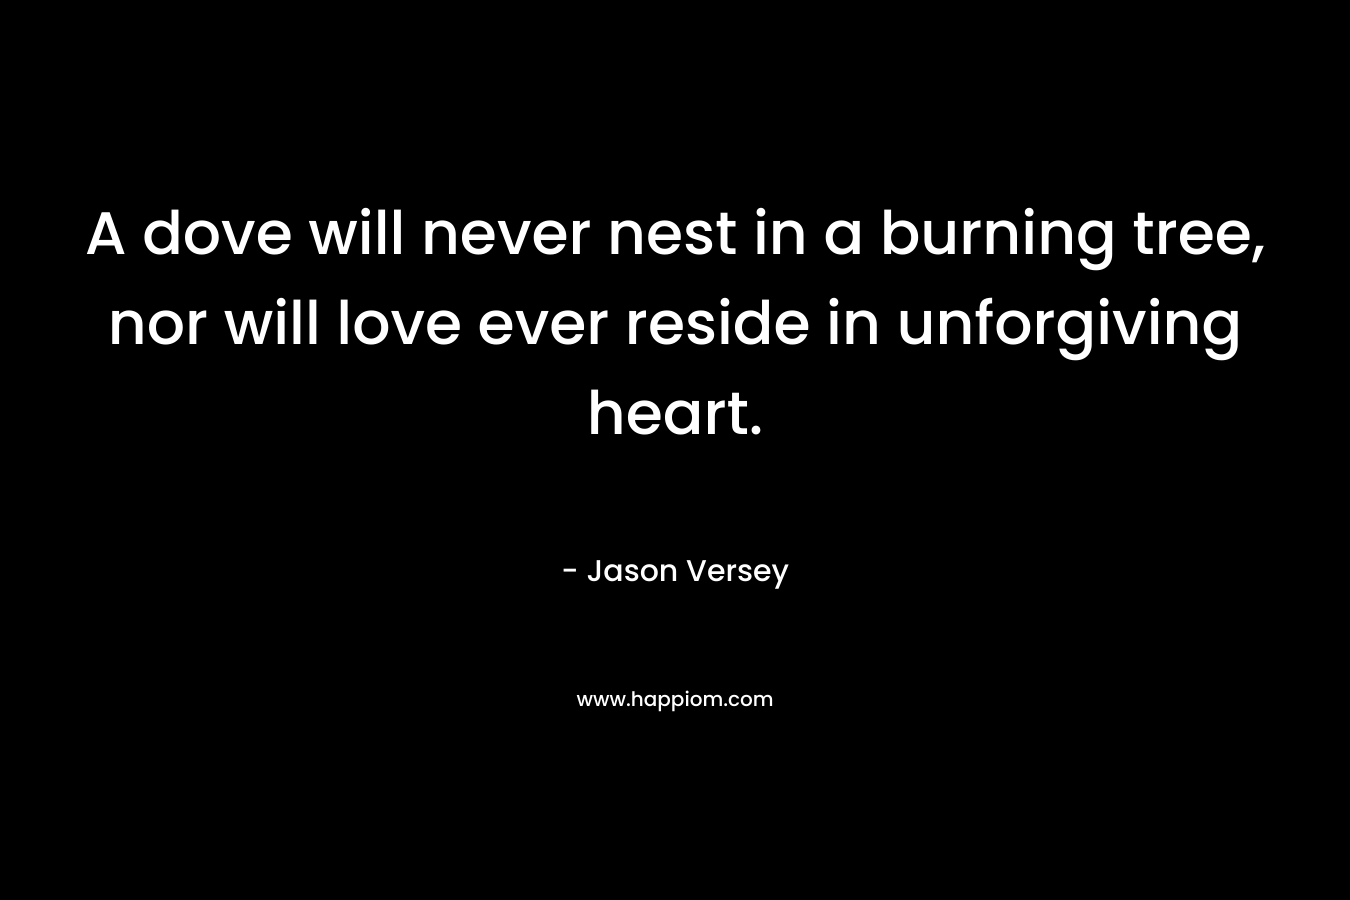 A dove will never nest in a burning tree, nor will love ever reside in unforgiving heart. – Jason Versey